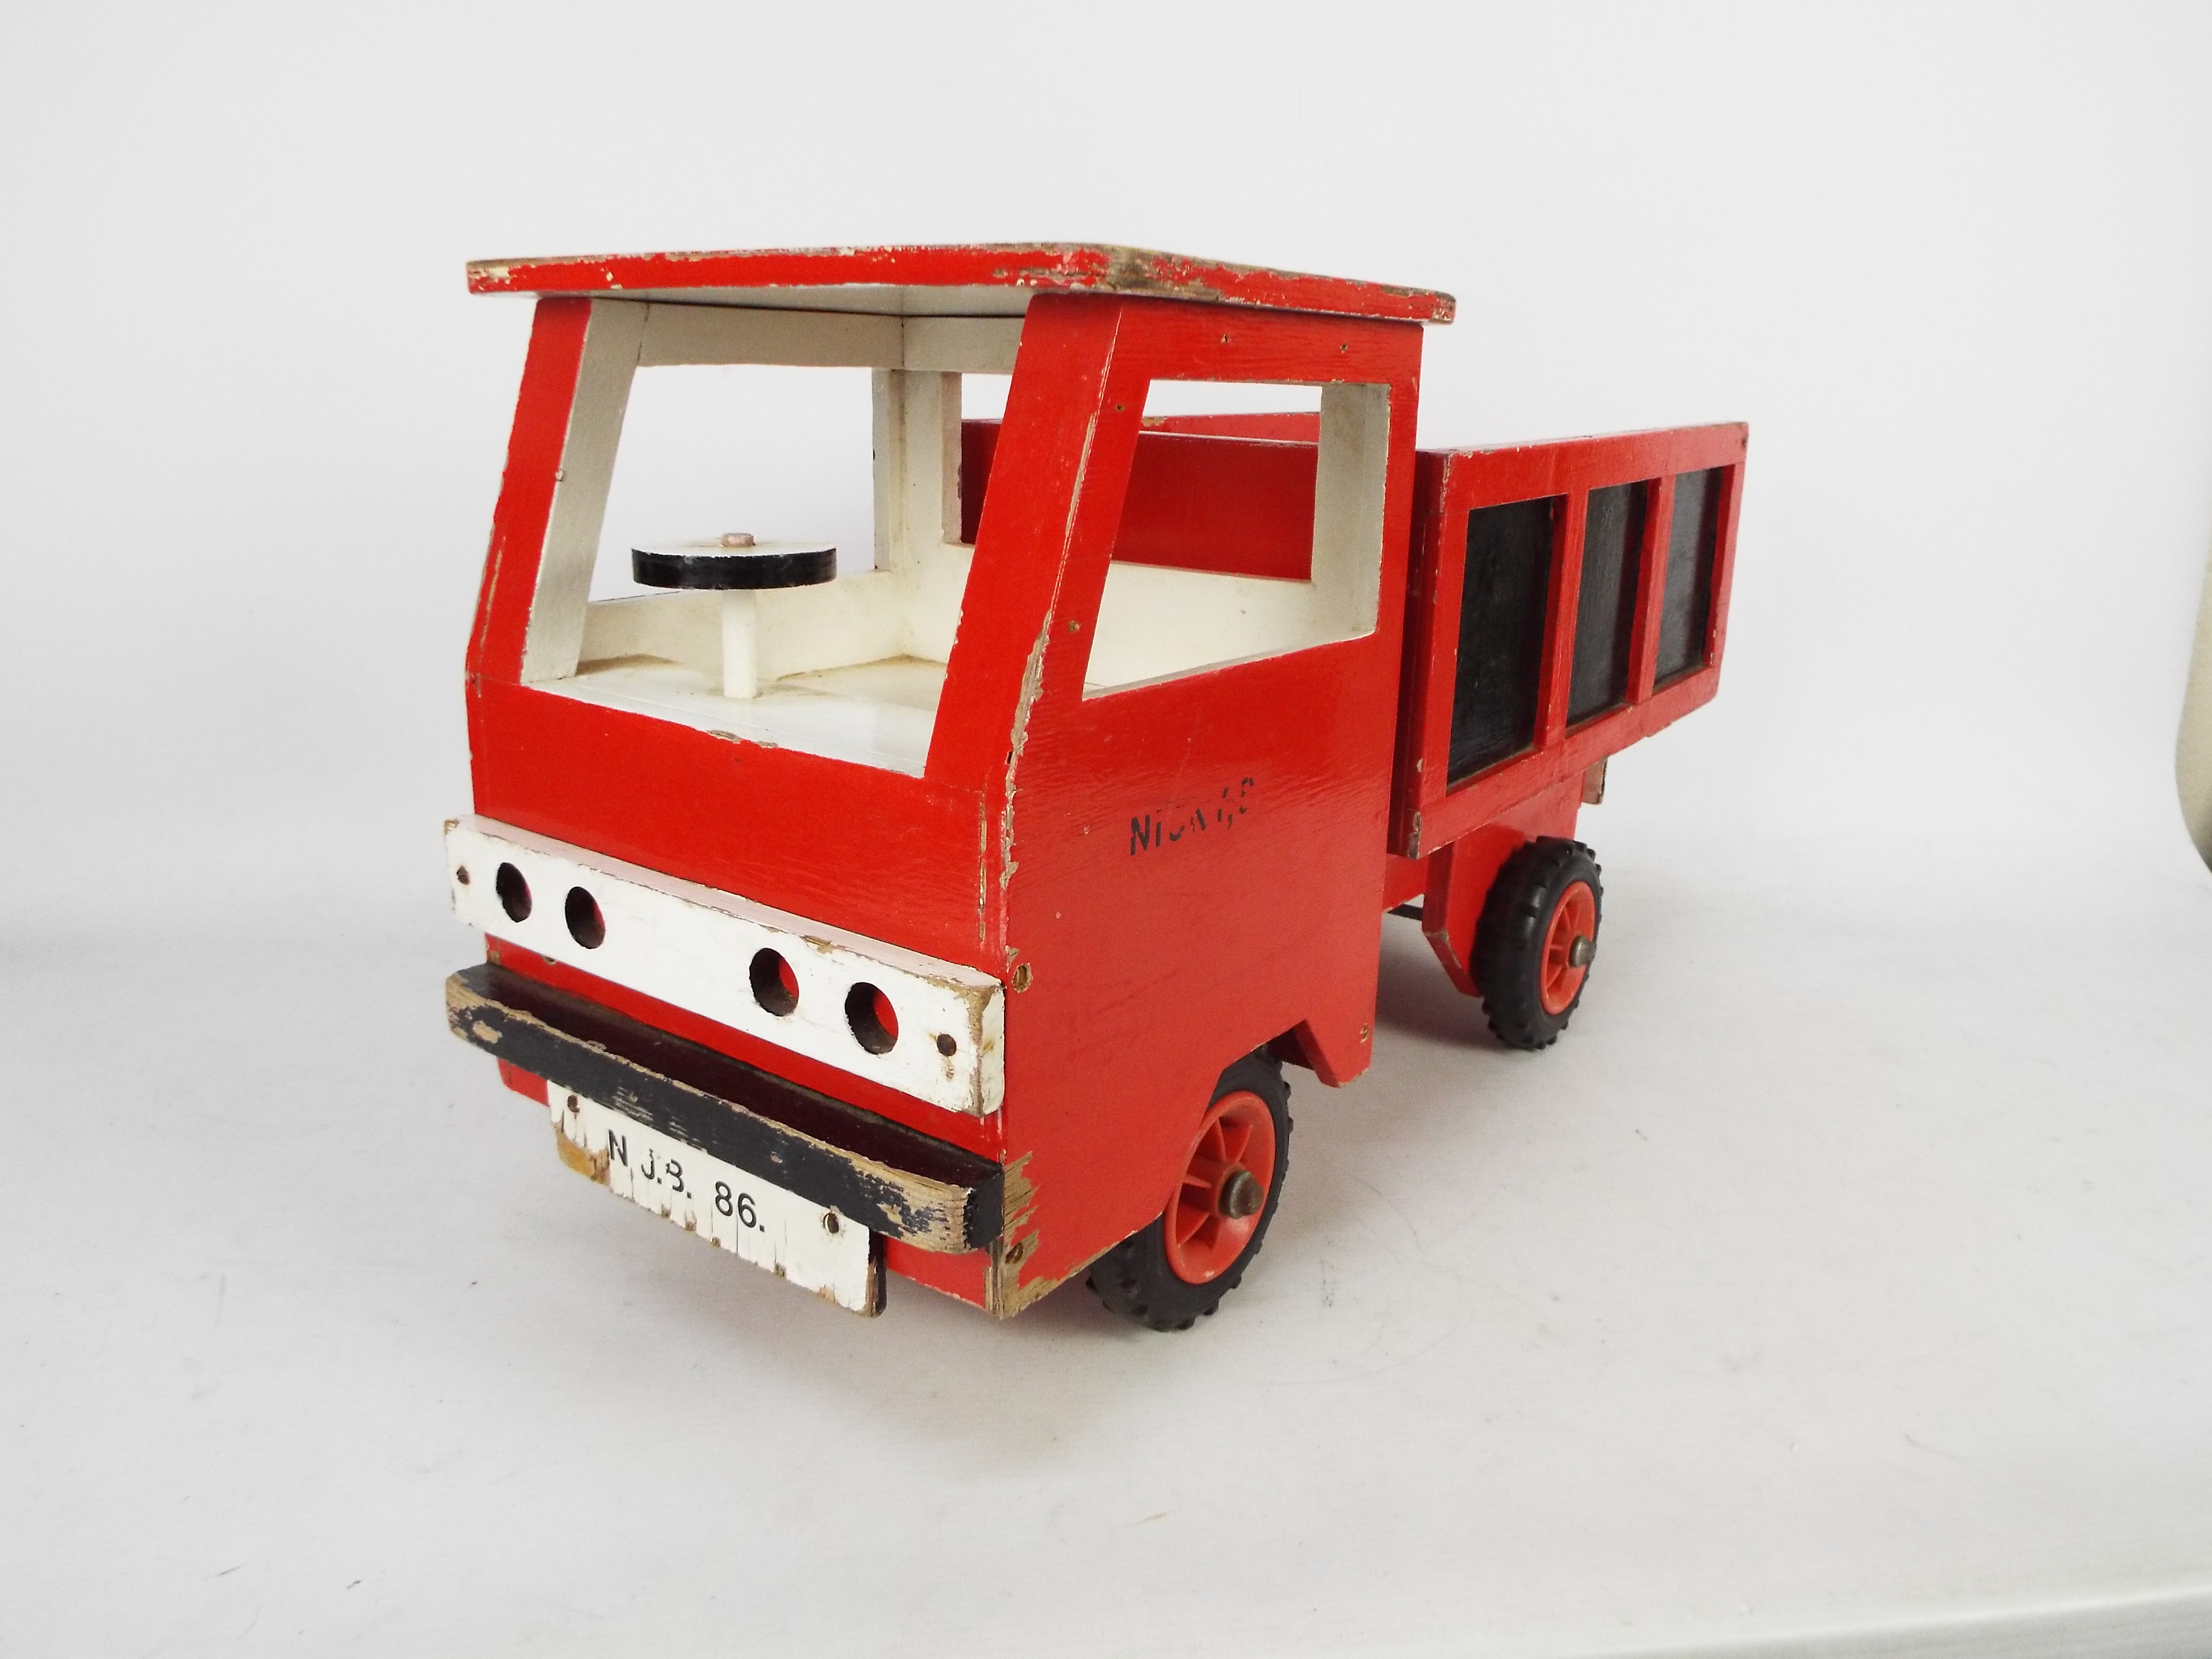 A vintage hand-made wooden tipper truck painted red with black panels and white driver's cab, - Image 4 of 5